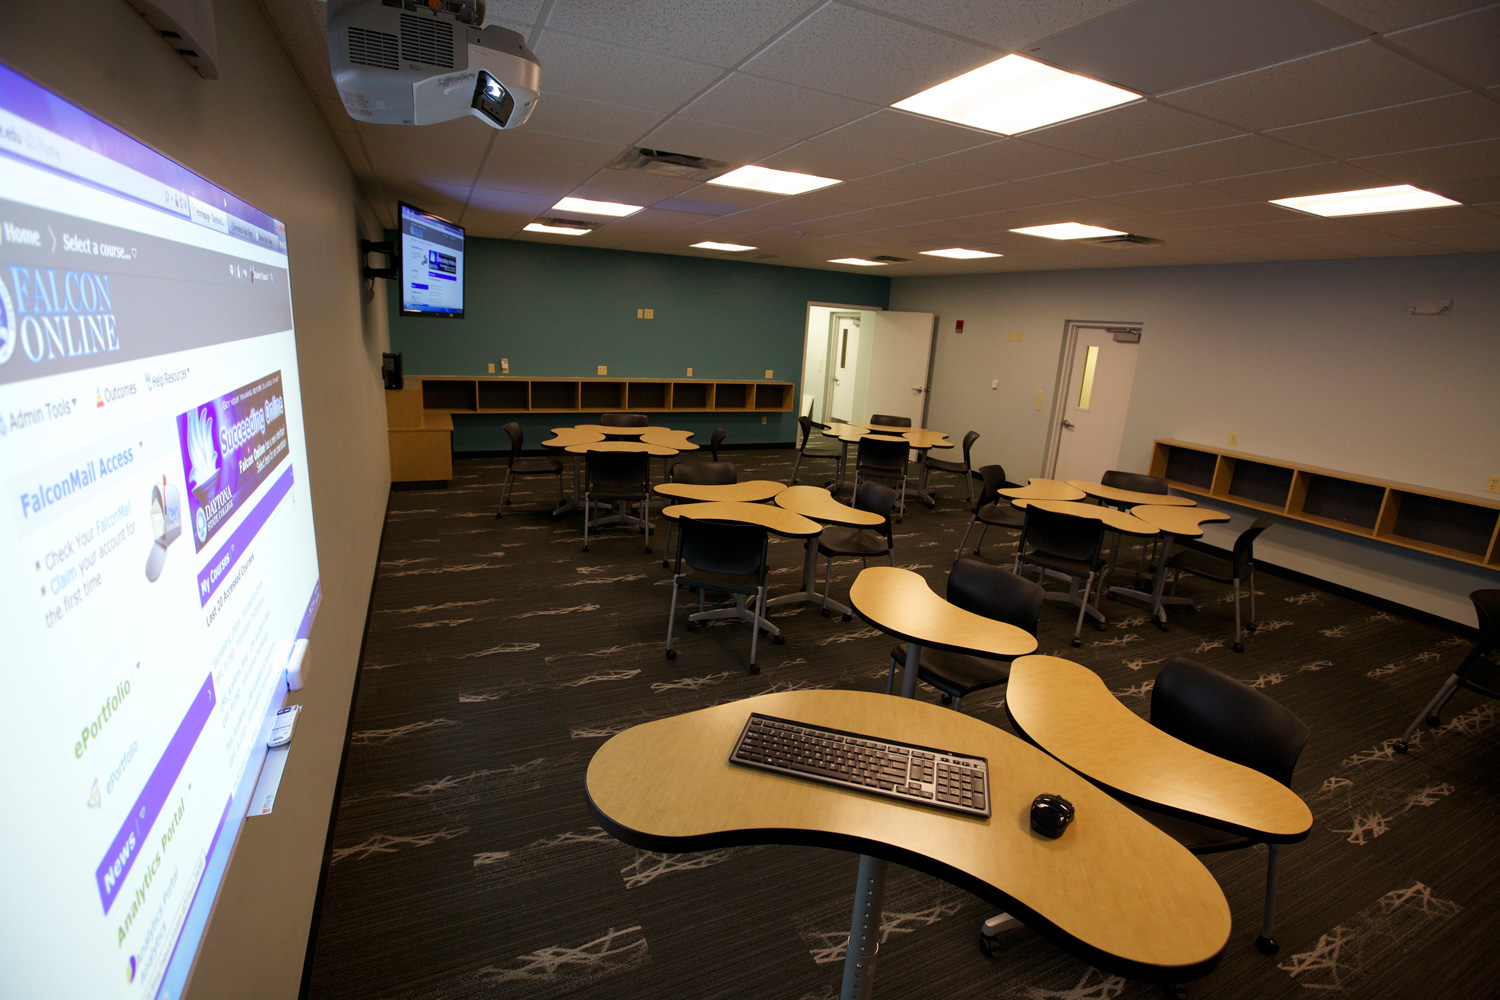 Classroom of the Future blends old-school teaching with high-tech learning